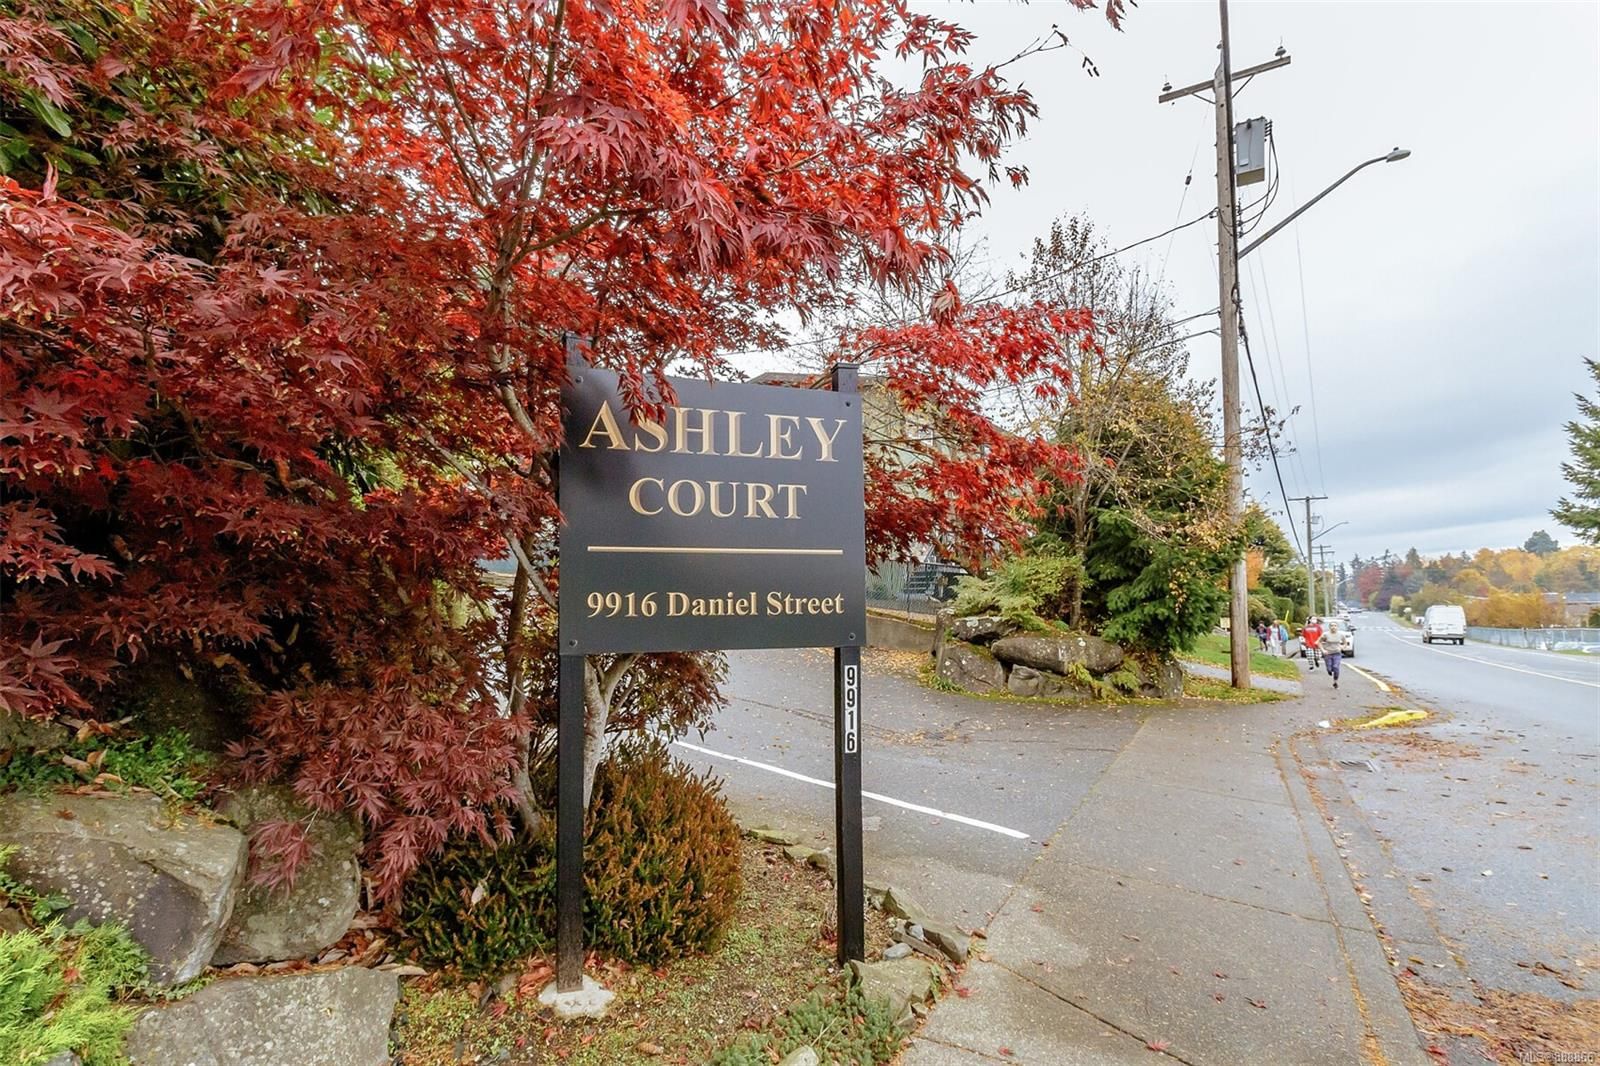 Ashley Court Sign at Street